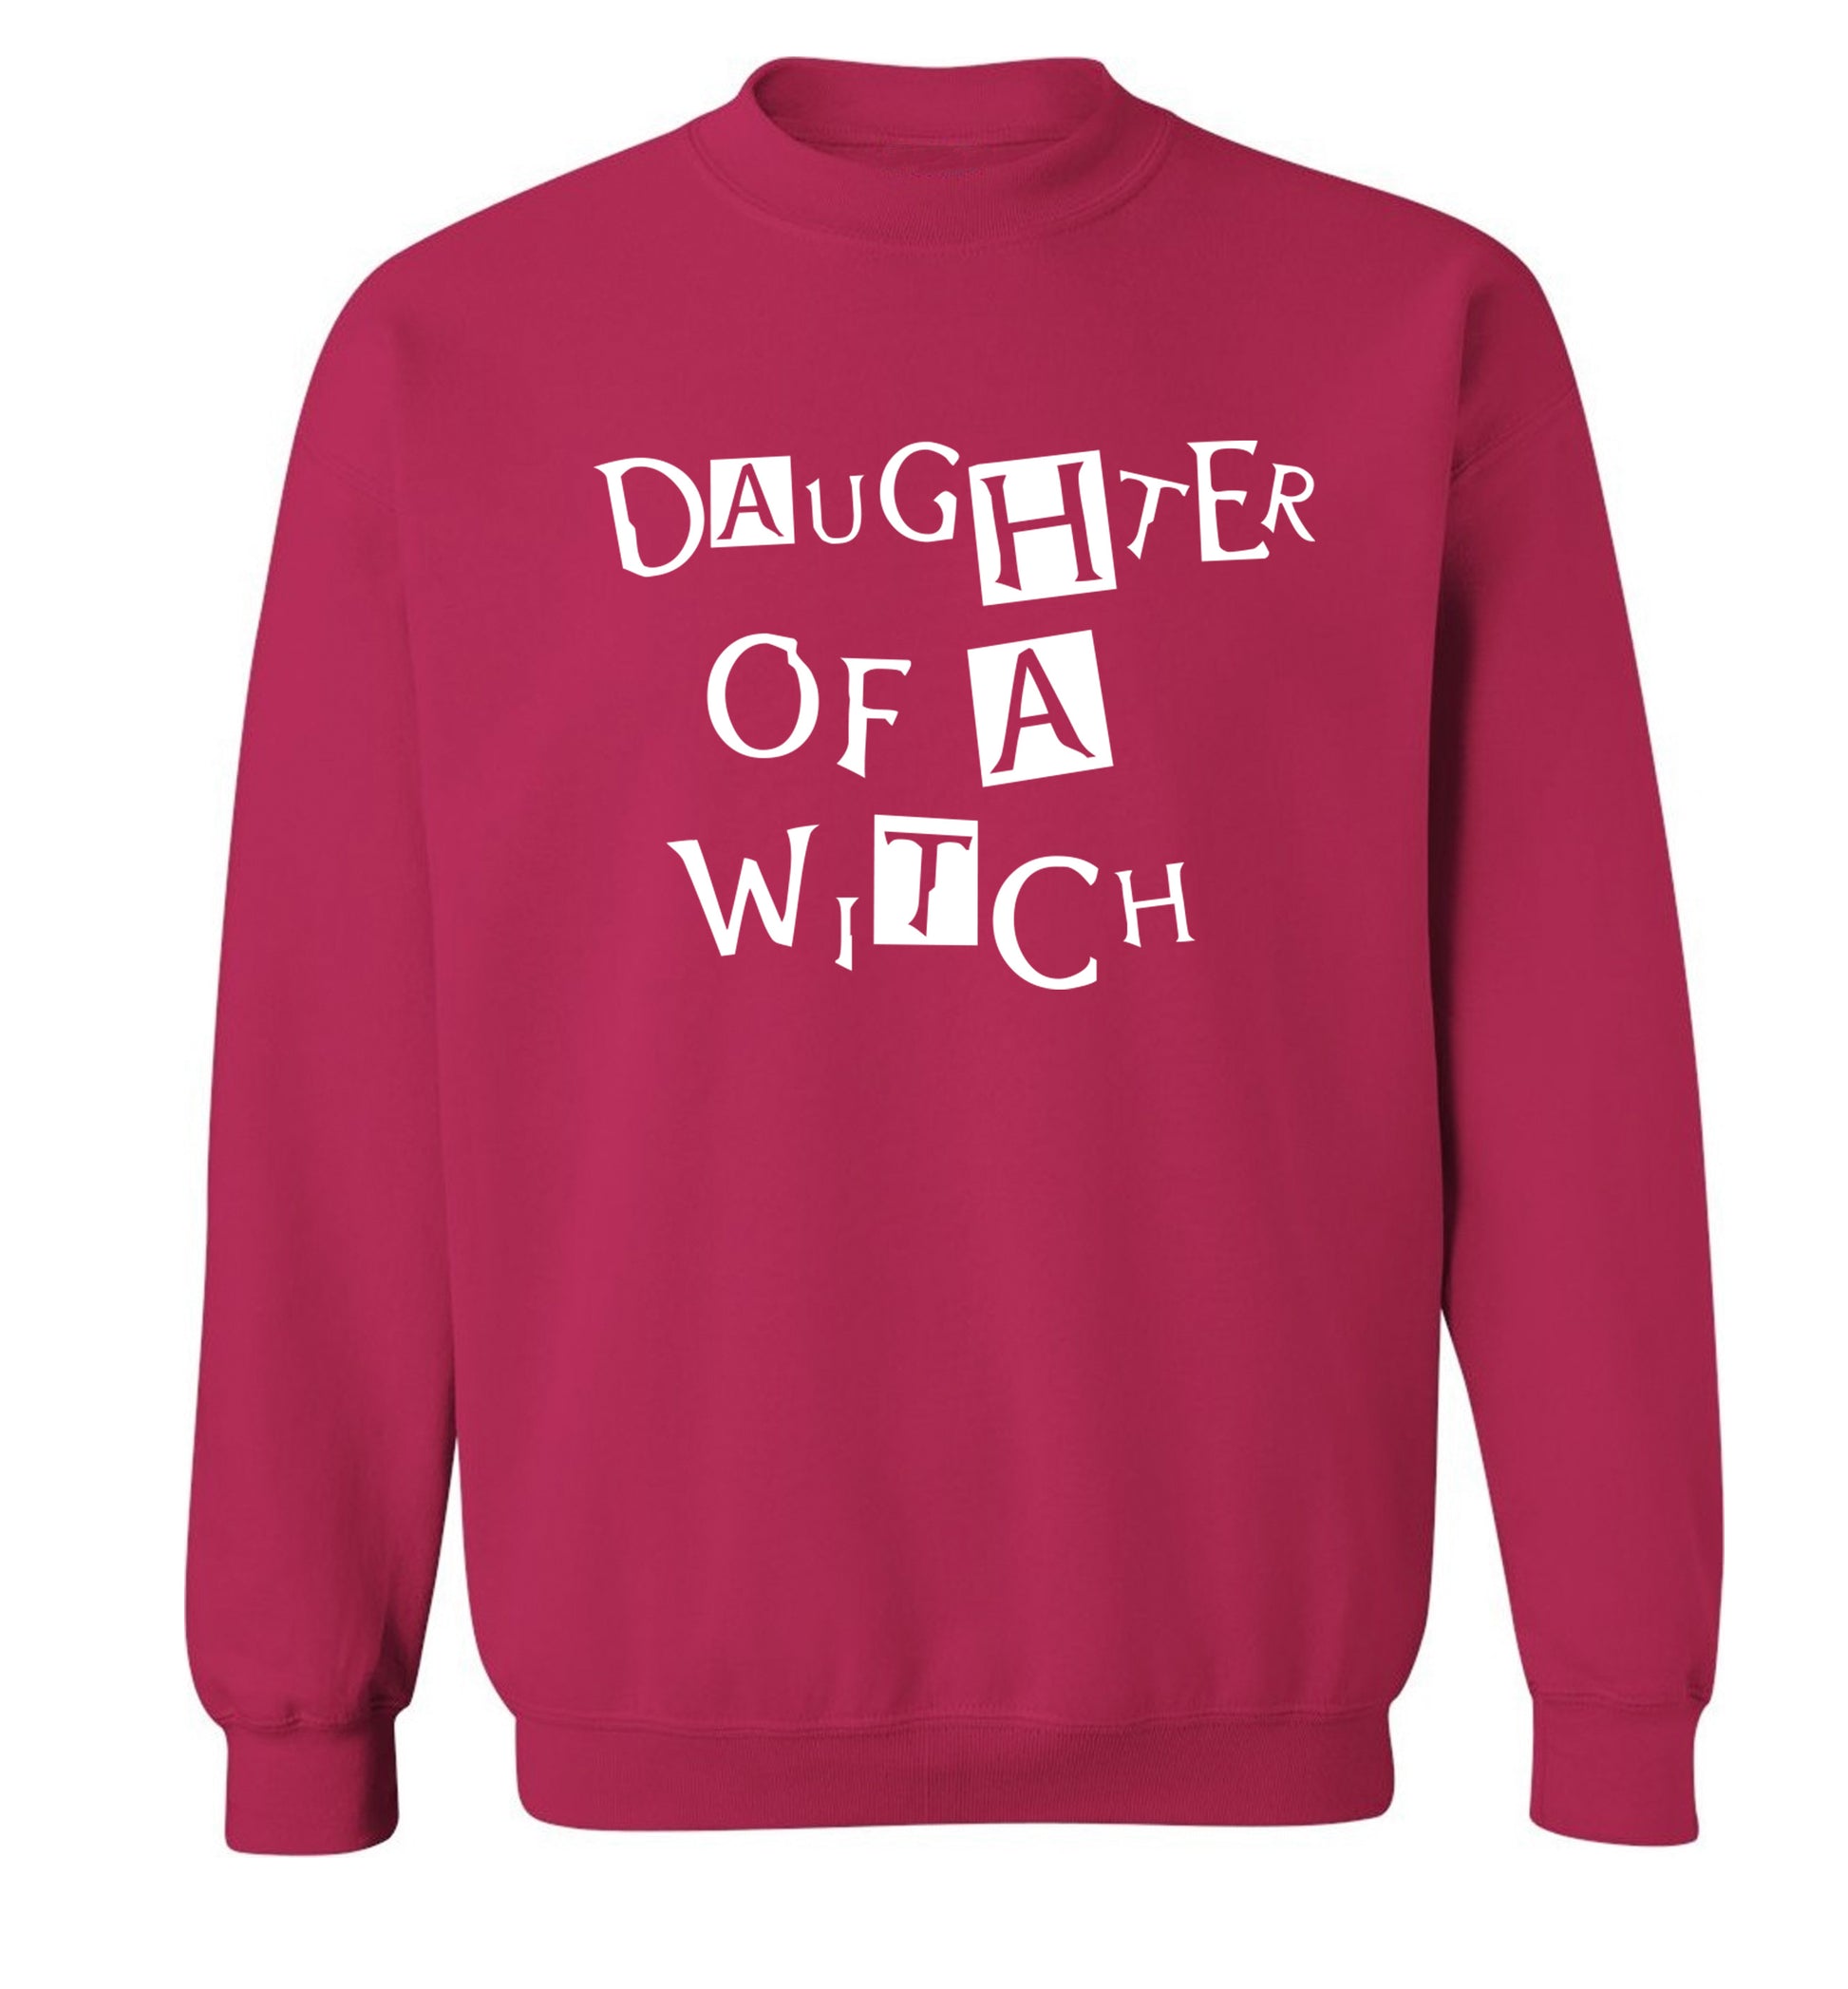 Daughter of a witch Adult's unisex pink Sweater 2XL